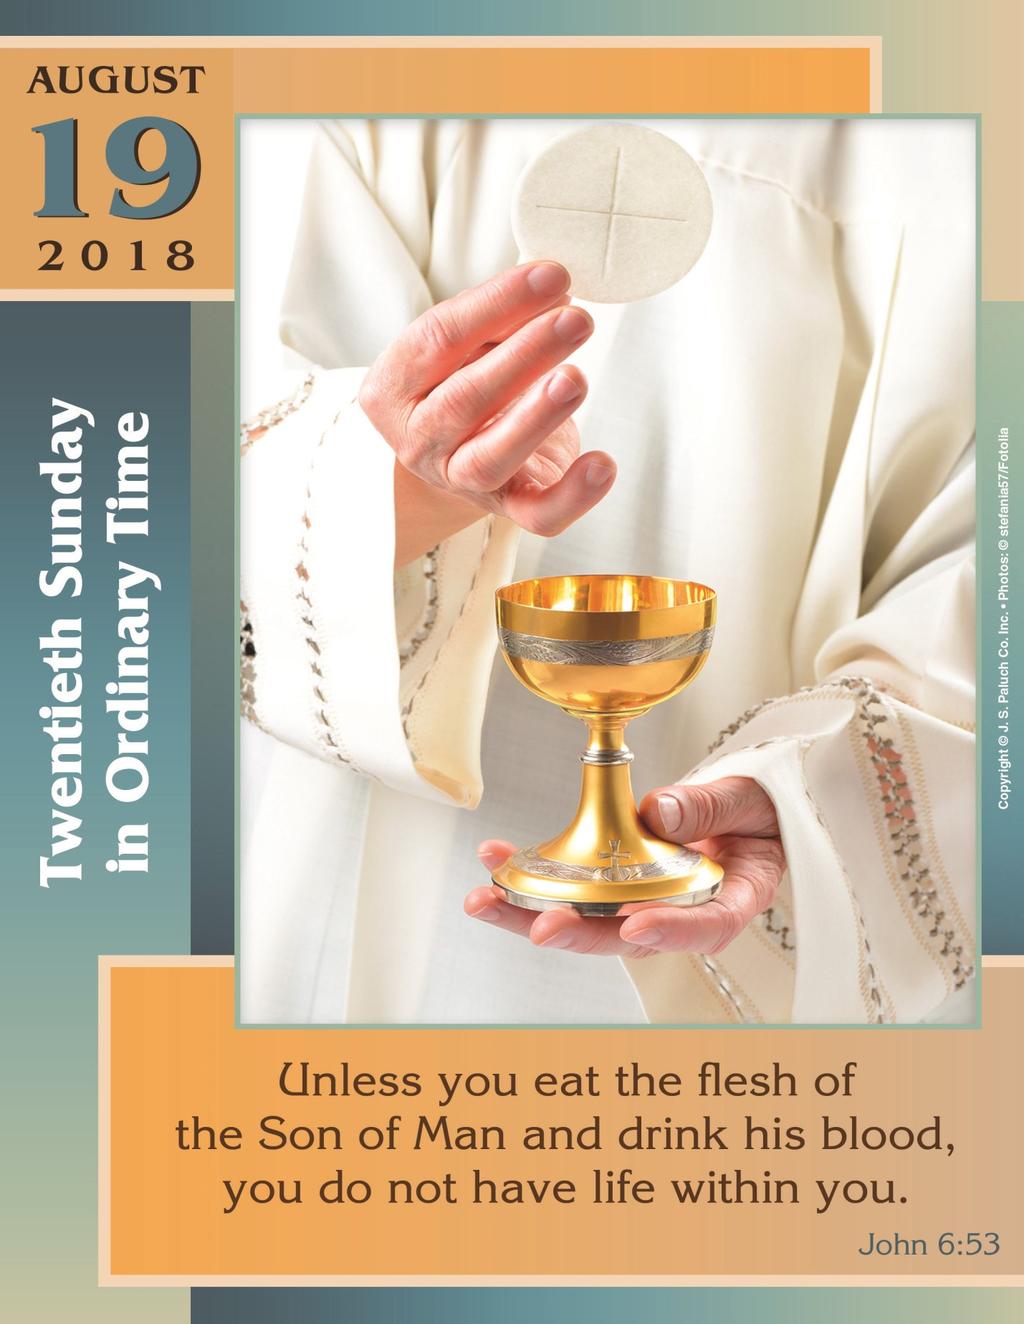 Saint Ladislaus Parish WELCOME! At St. Ladislaus, Merciful Jesus is the center of our lives and in His mercy we find strength and peace. We meet Jesus, at the celebration of the Eucharist.